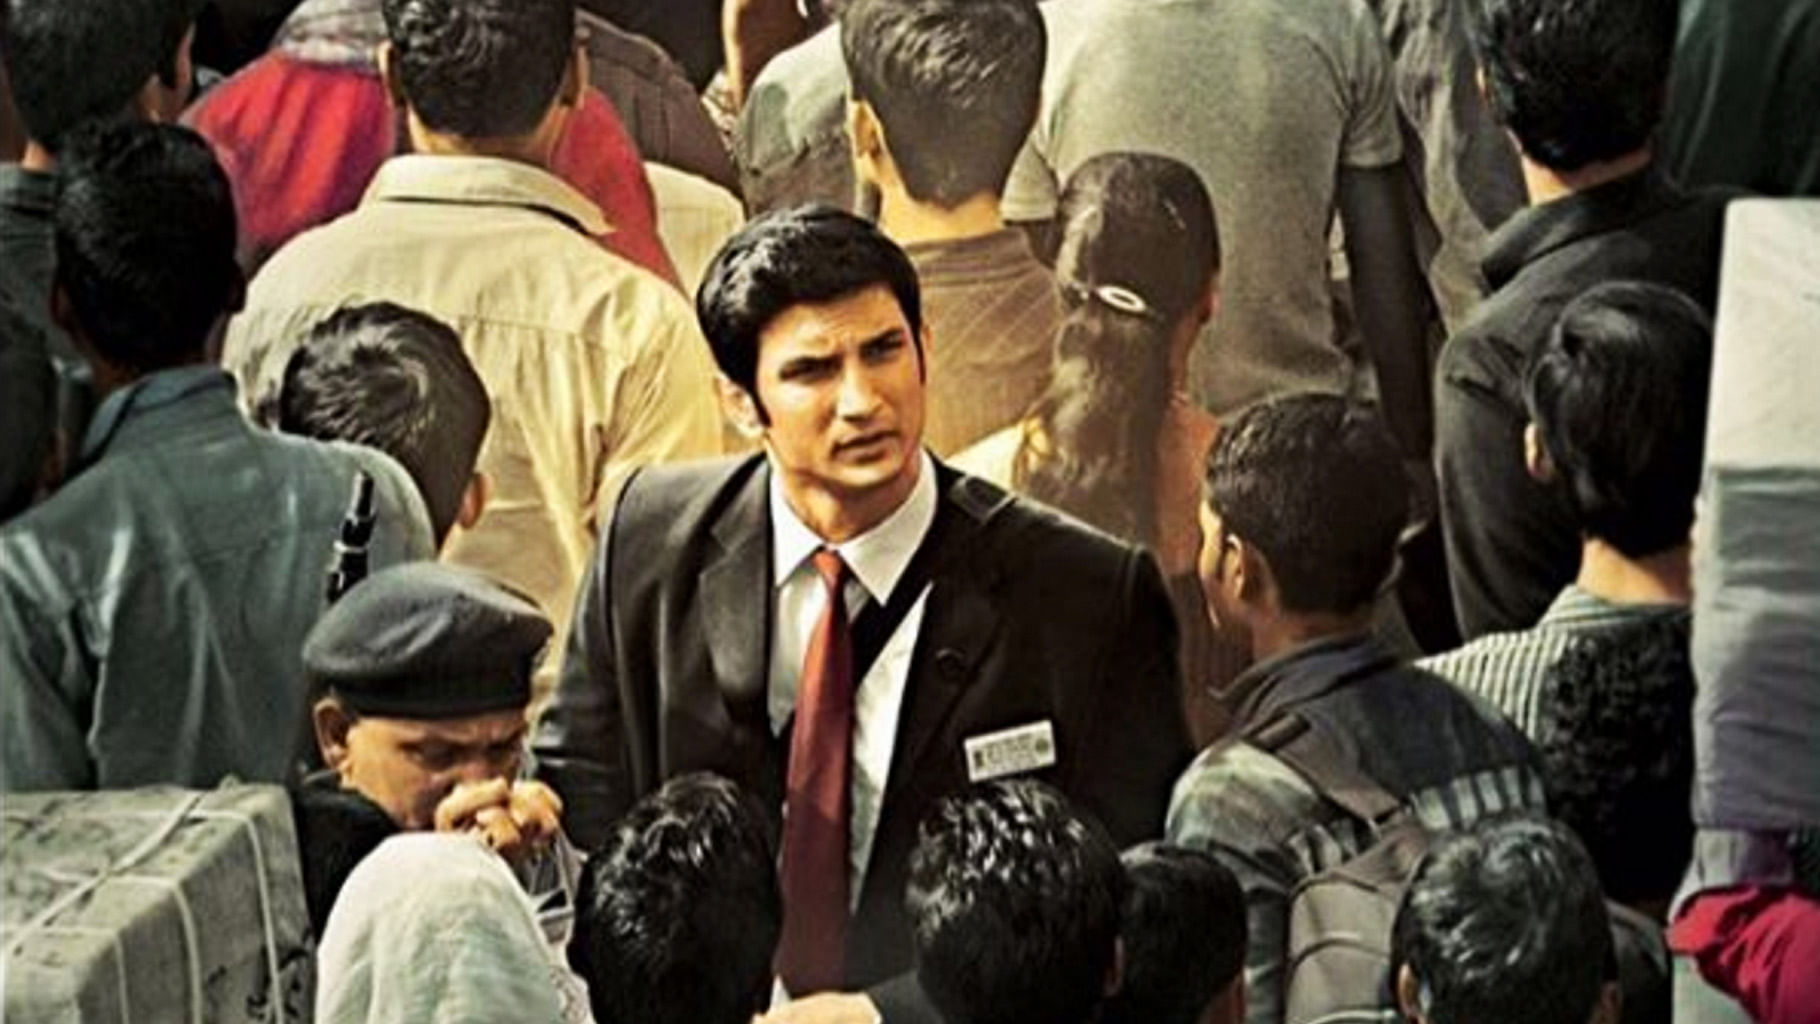 Sushant Singh Rajput plays MS Dhoni in the upcoming biopic, teaser released today (Photo: Twitter/<a href="https://twitter.com/itsSSR">itsSSR</a>)